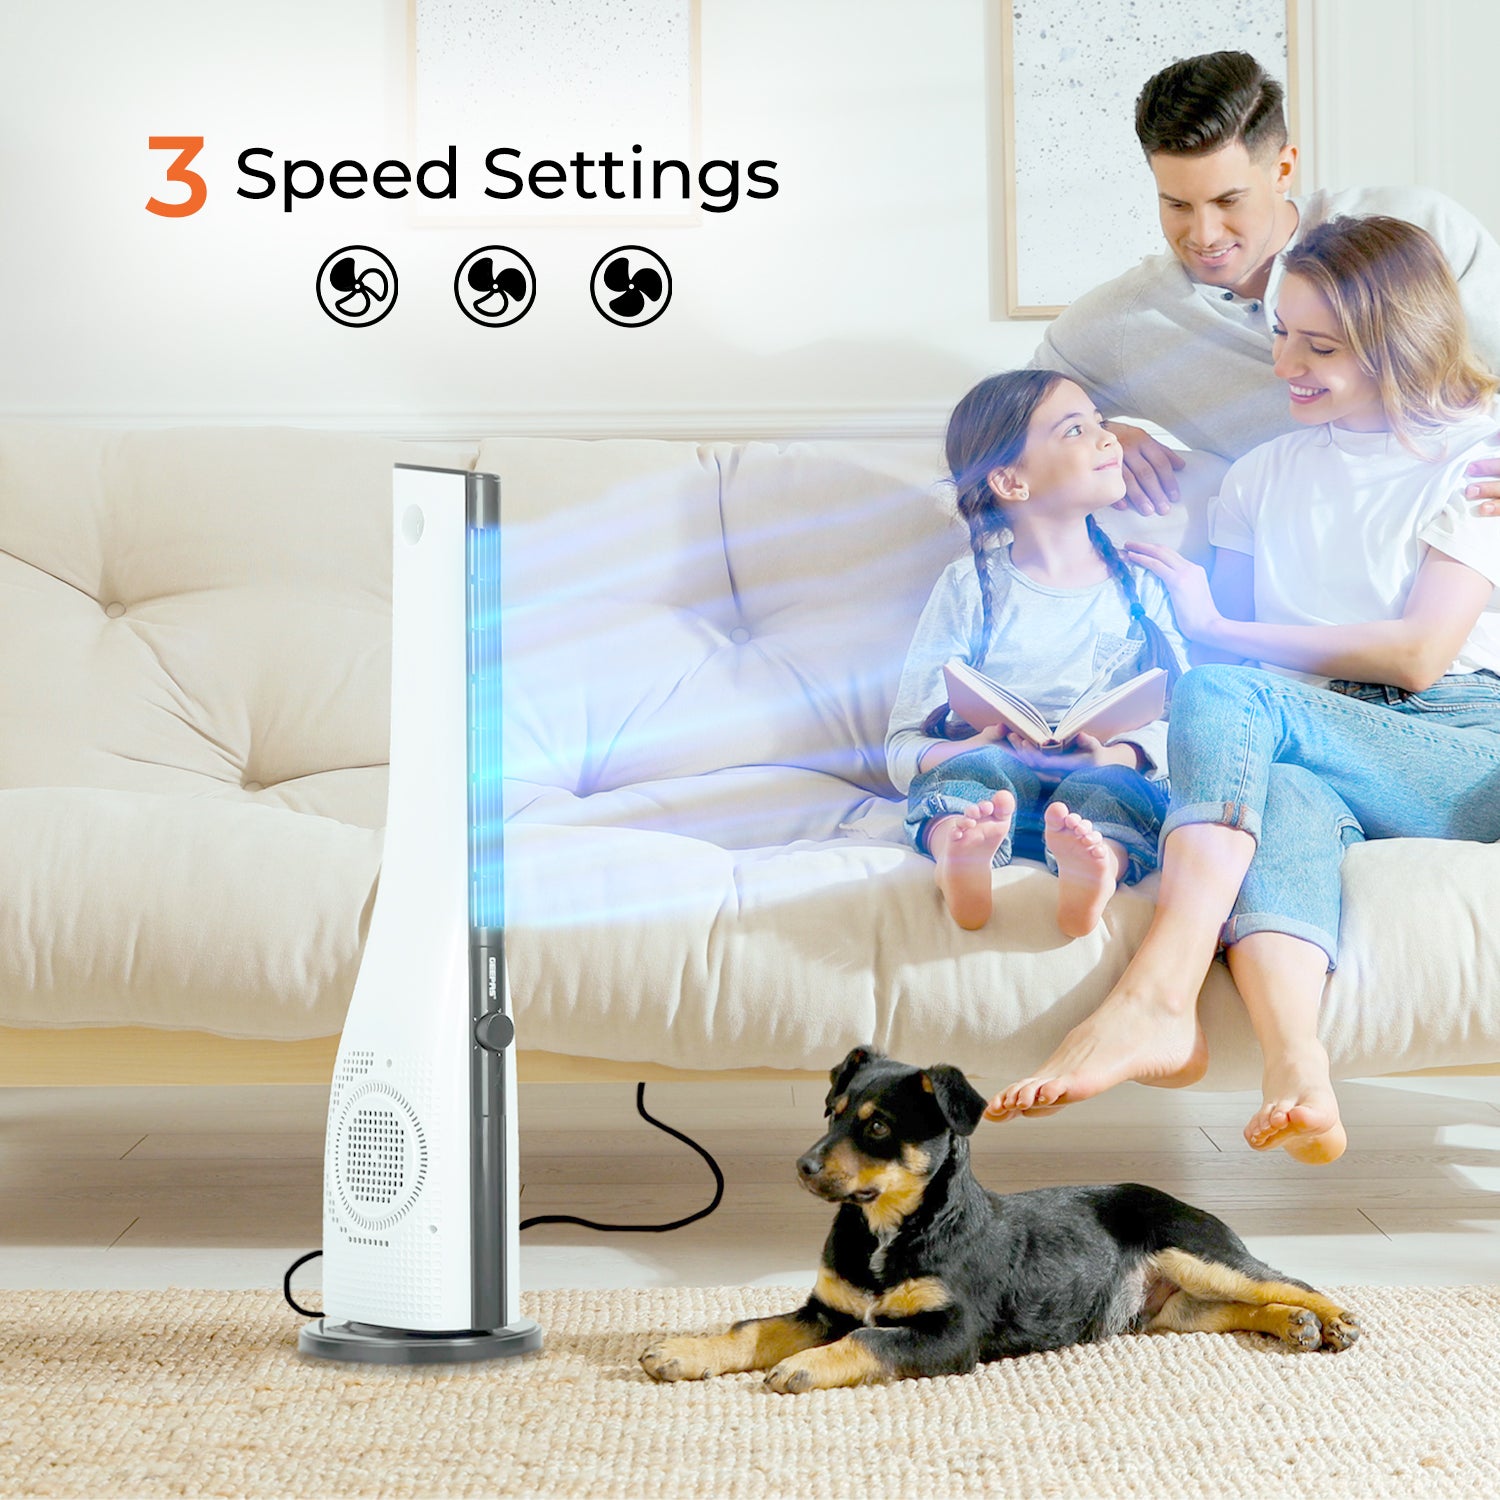 This image shows the white cooling tower fan with a family sitting on a sofa besides the fan along with a puppy sitting on the carpet next to the fan.